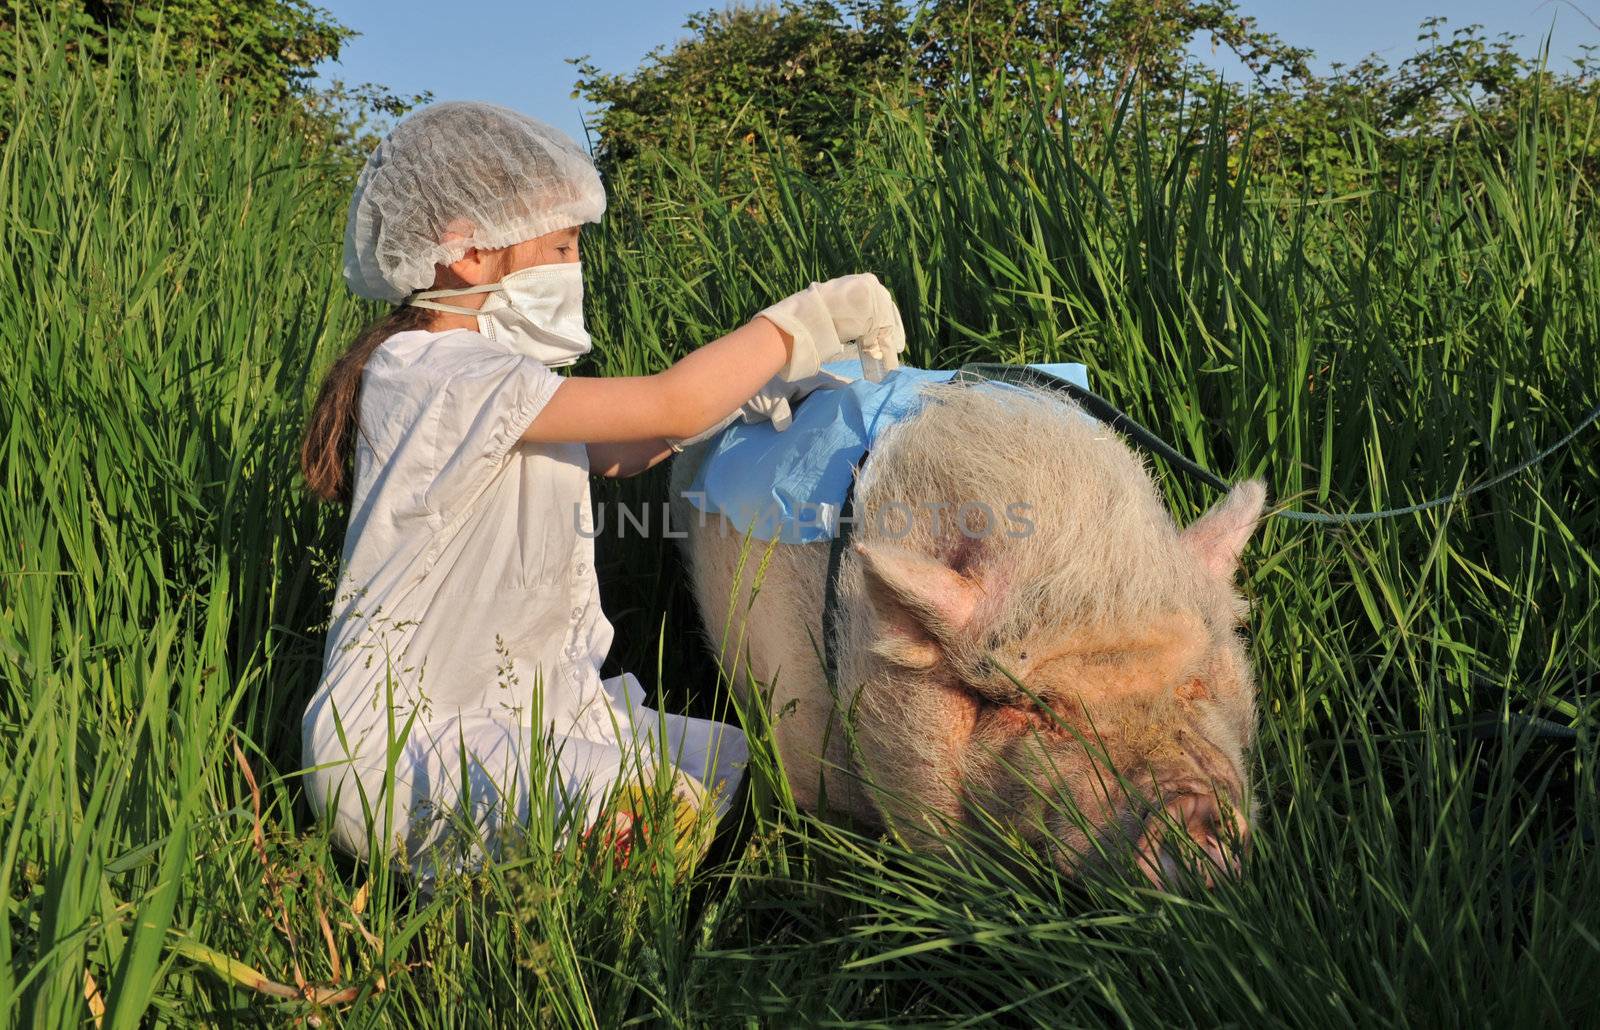 child playing with a pig and risk th swine influenza flu